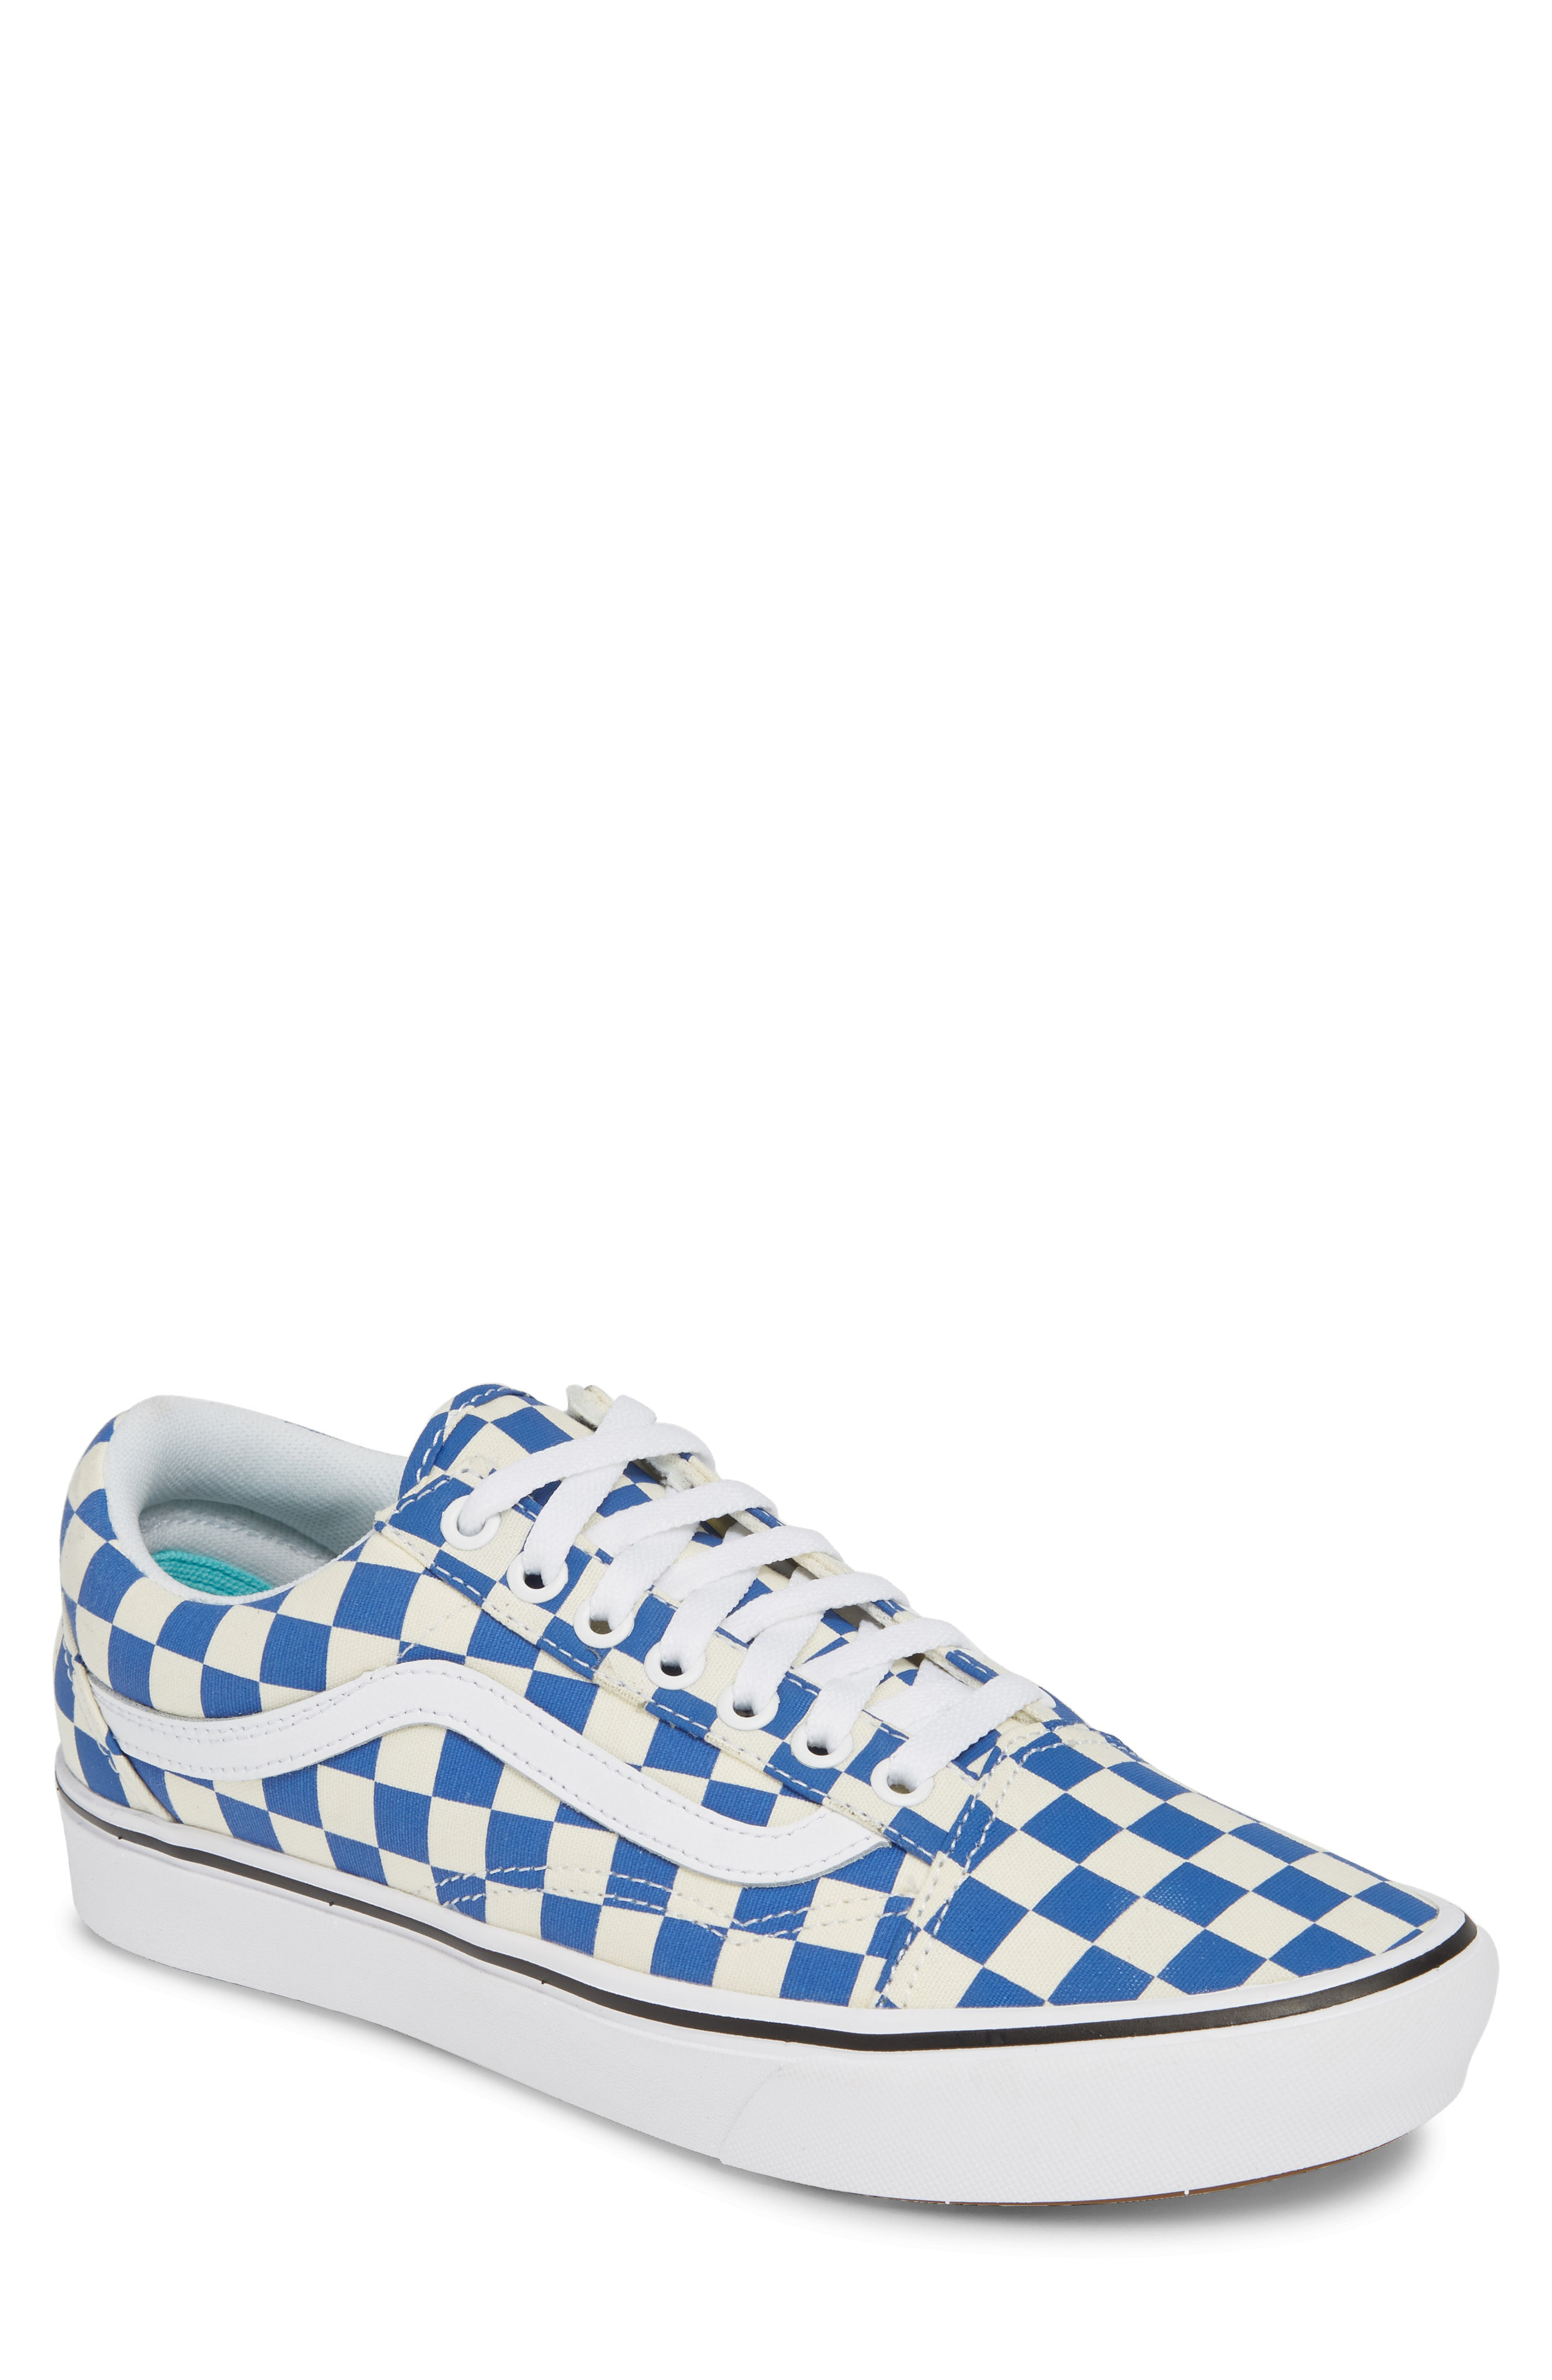 checkerboard vans blue and white